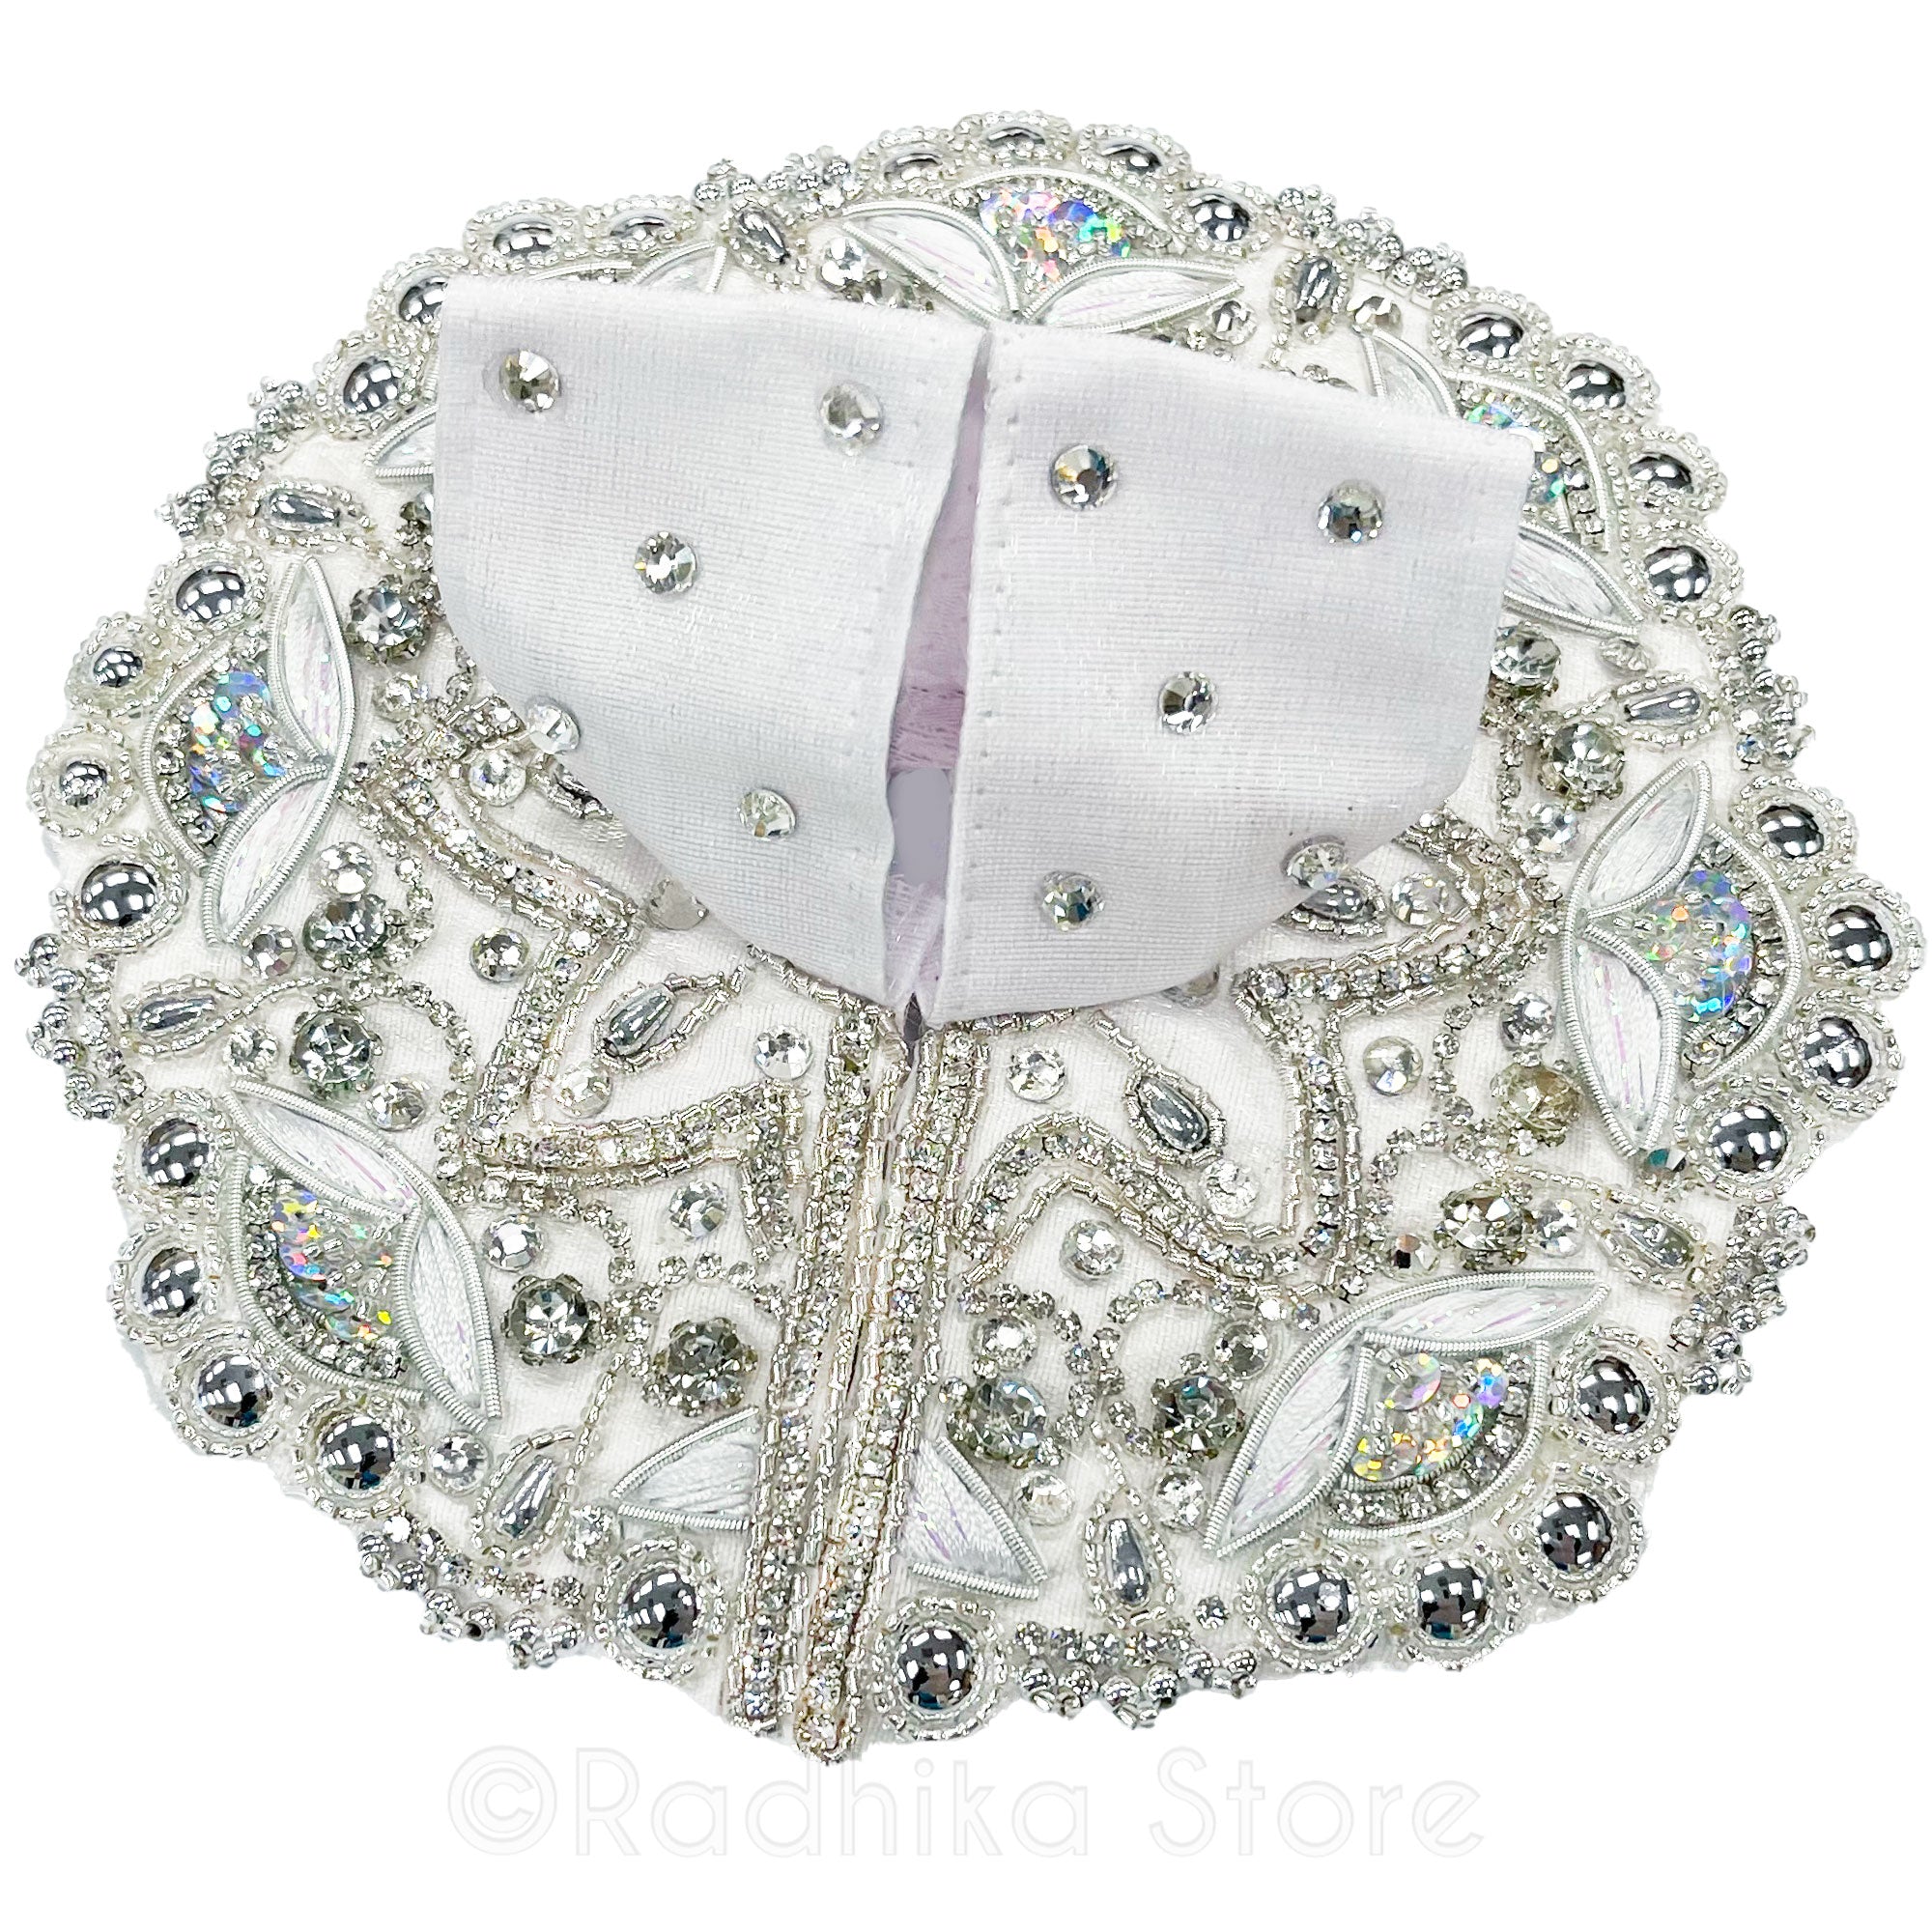 White Lotus Crystal - Laddu Gopal Outfit